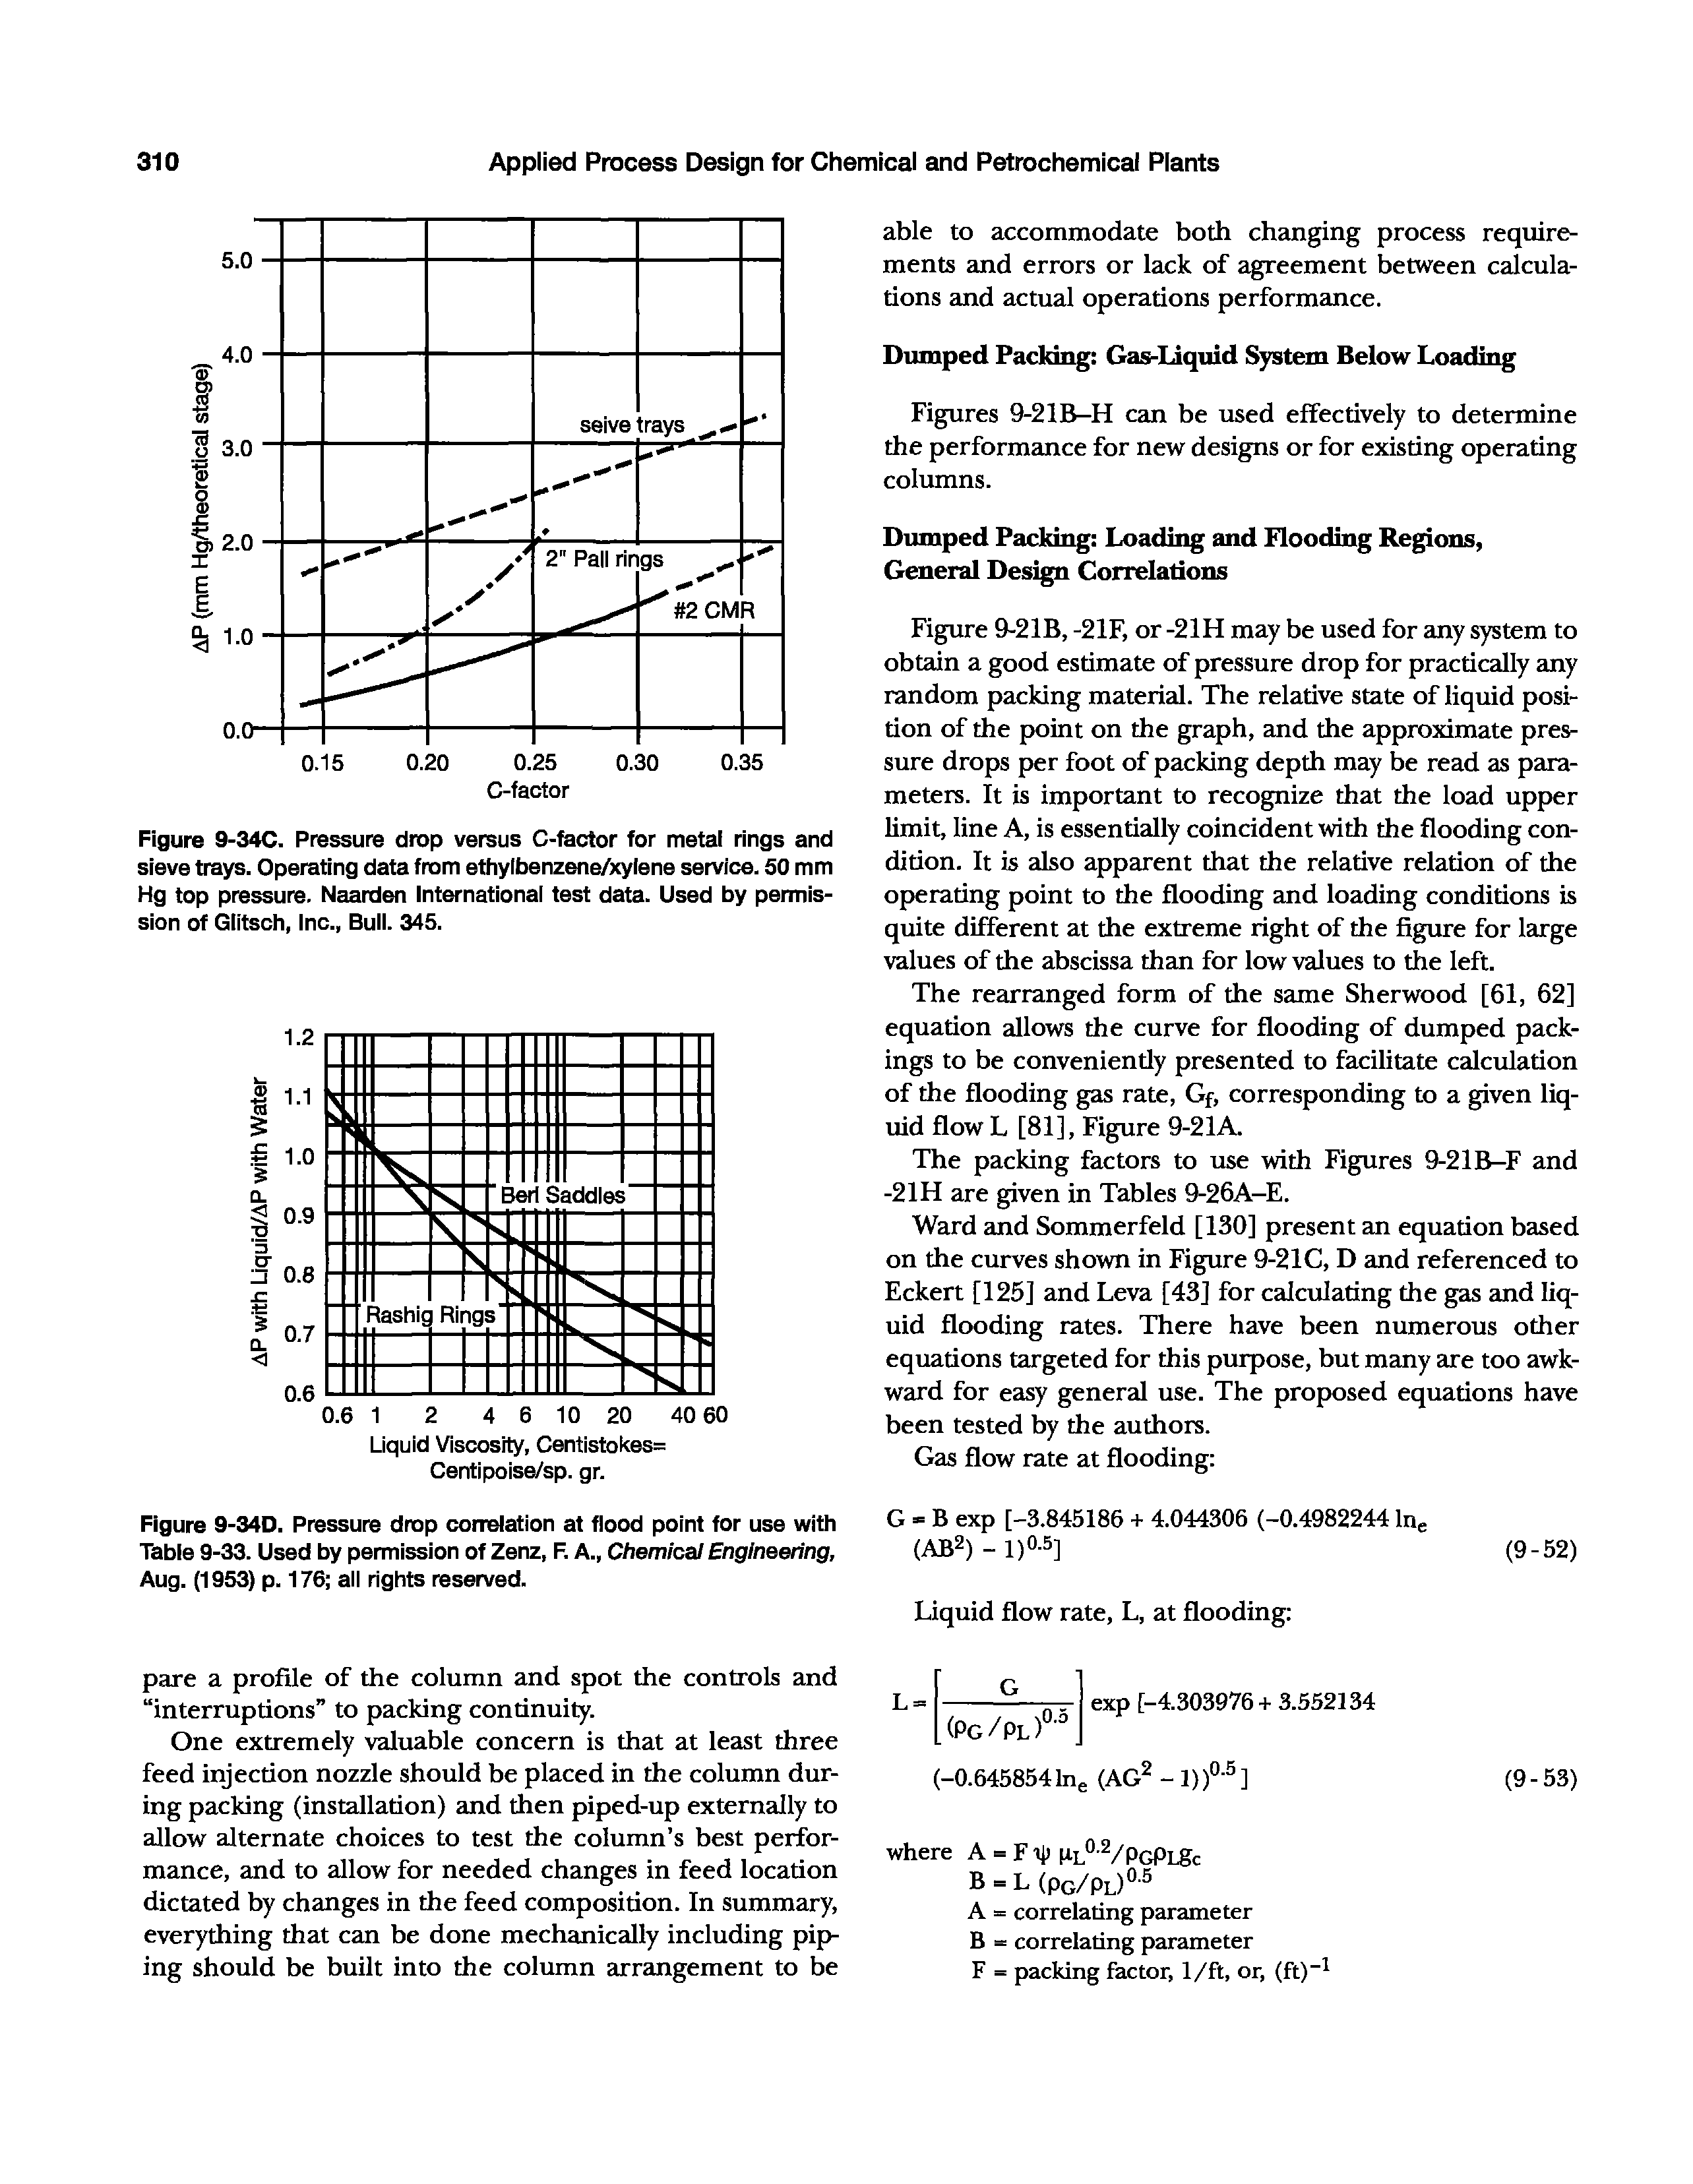 Figure 9-34D. Pressure drop correlation at flood point for use with Table 9-33. Used by permission of Zenz, F. A., Chemical Engineering, Aug. (1953) p. 176 all rights reserved.